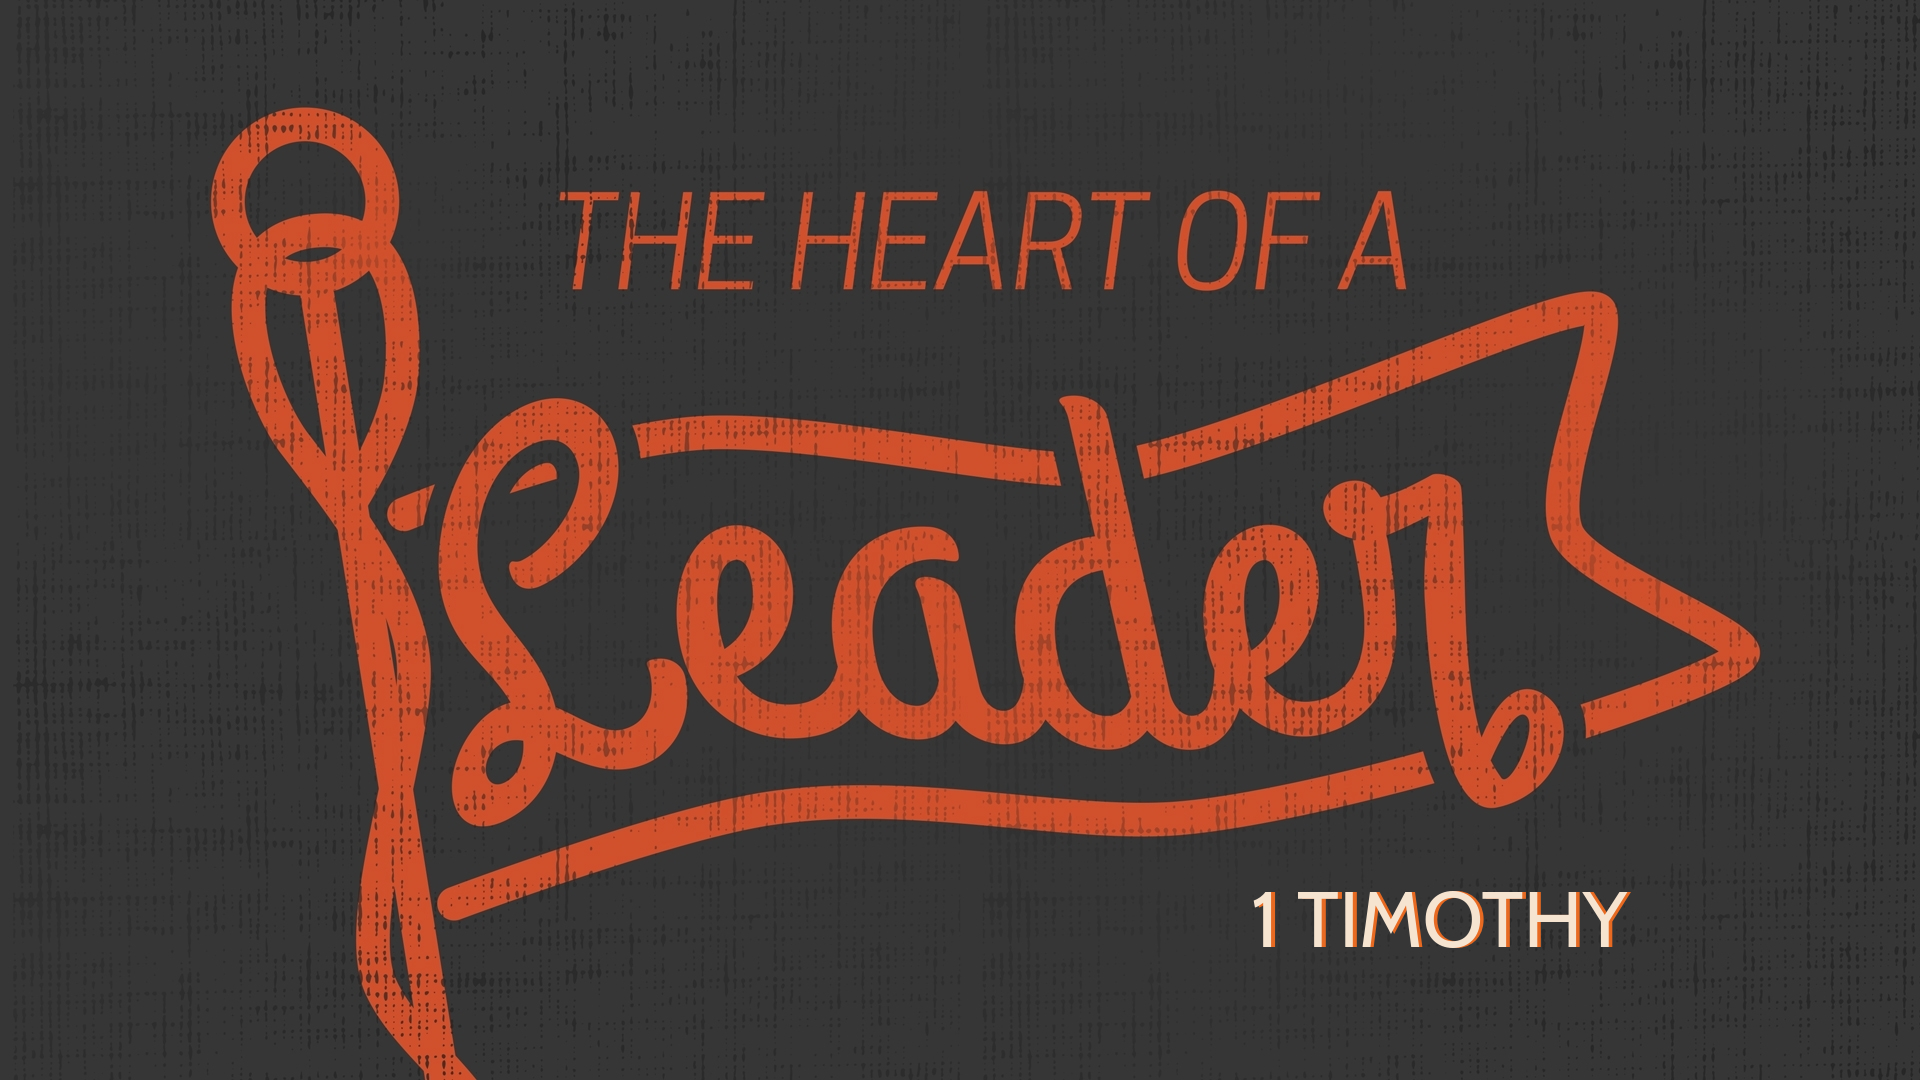 The Heart of A Leader